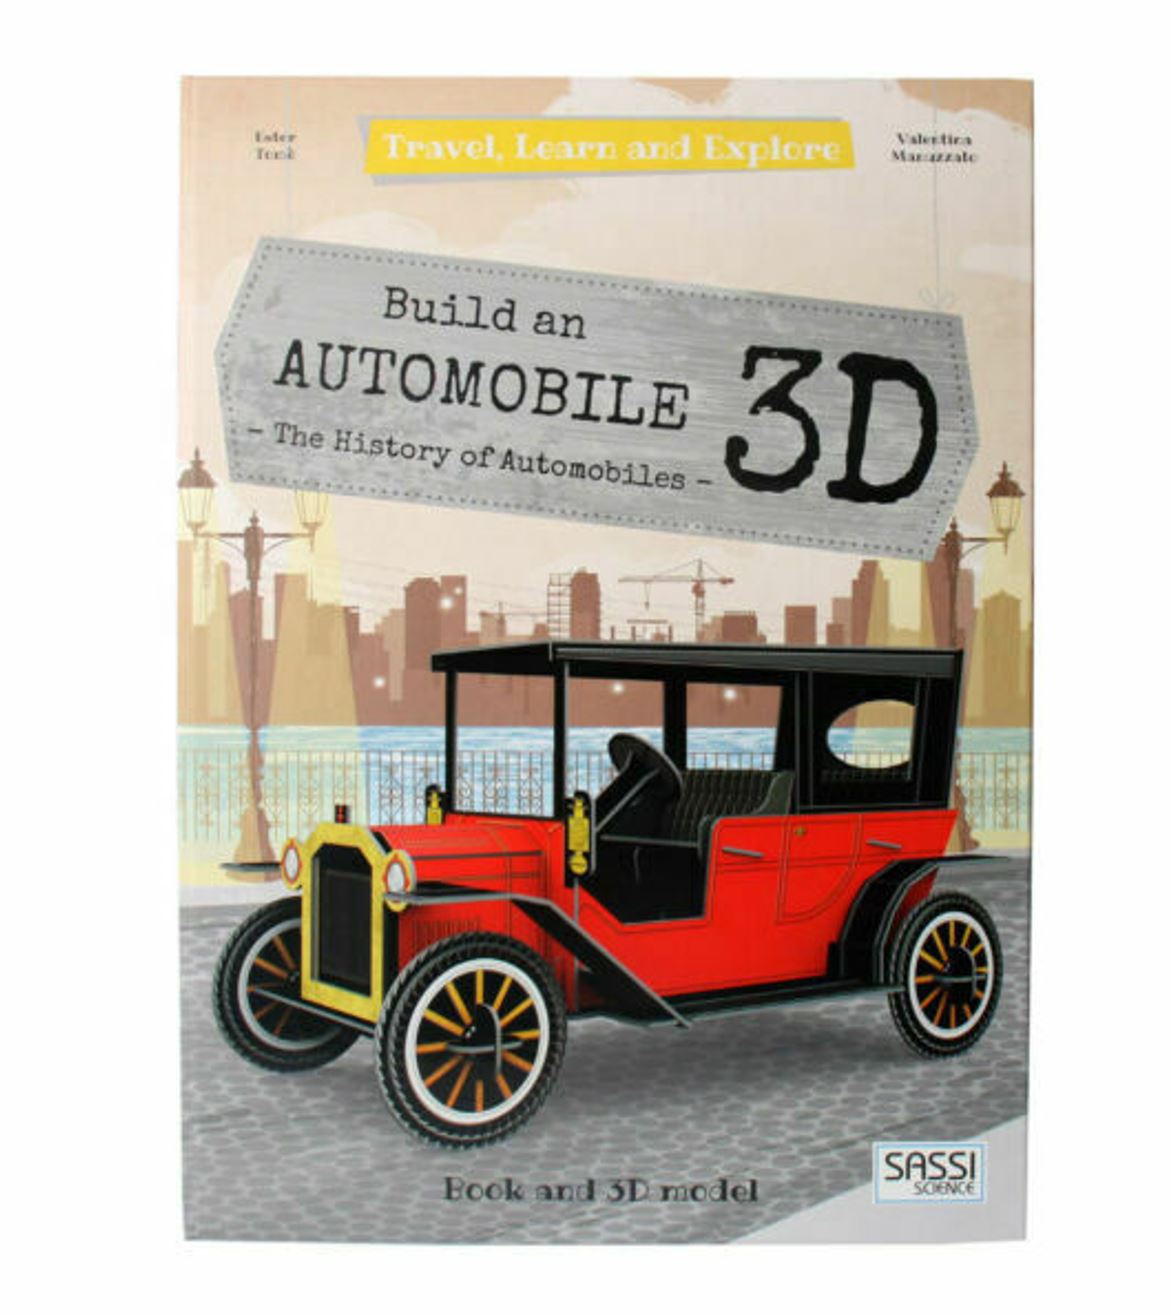 Build an Automobile 3D The History of Automobiles 